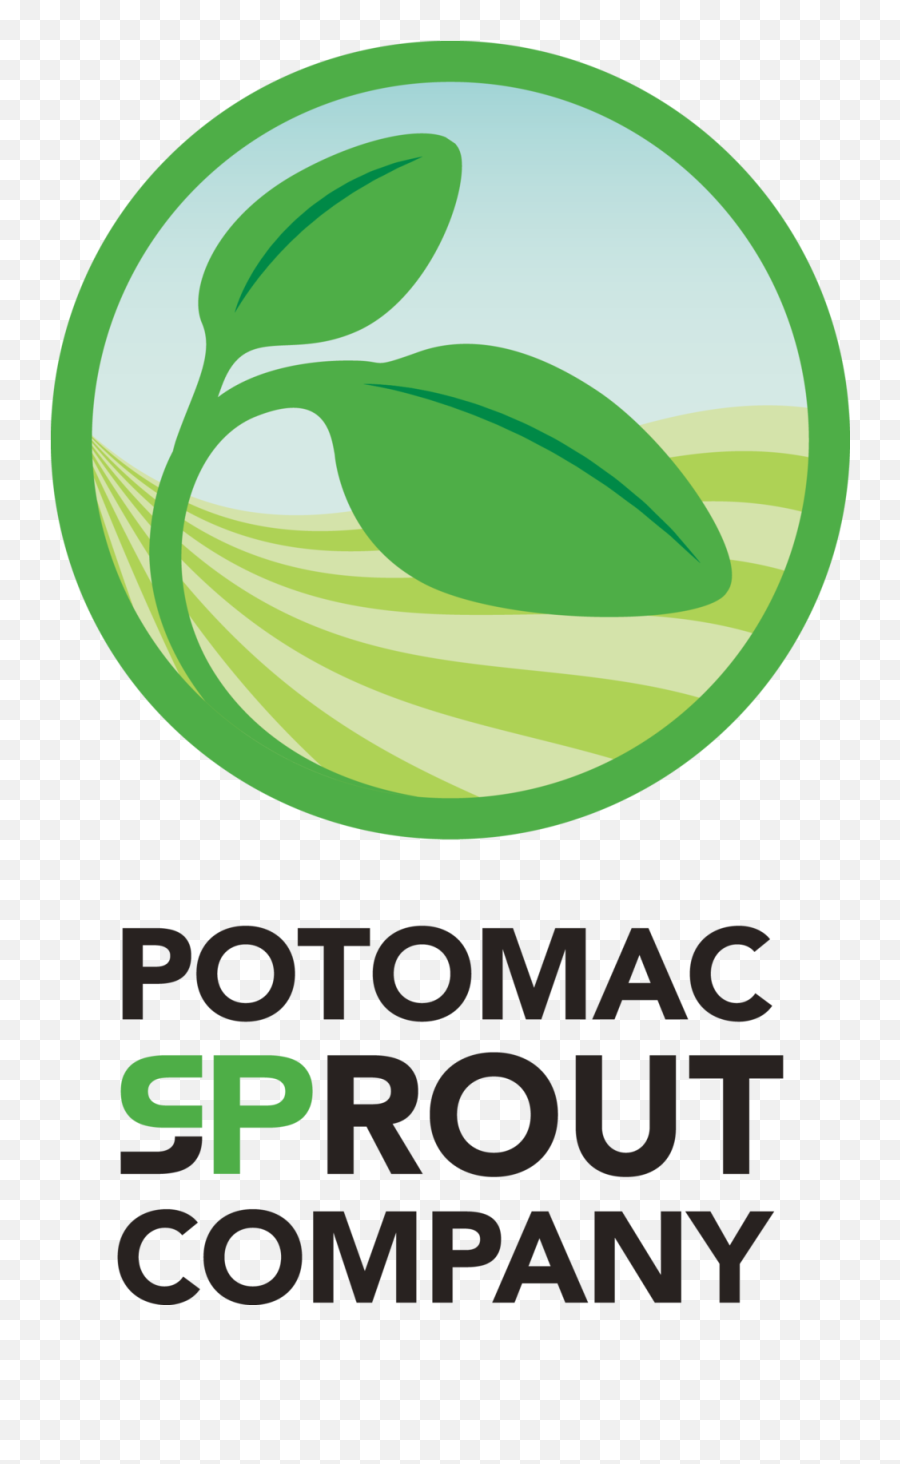 Potomac Sprout Co Emoji,Sprouts Logo